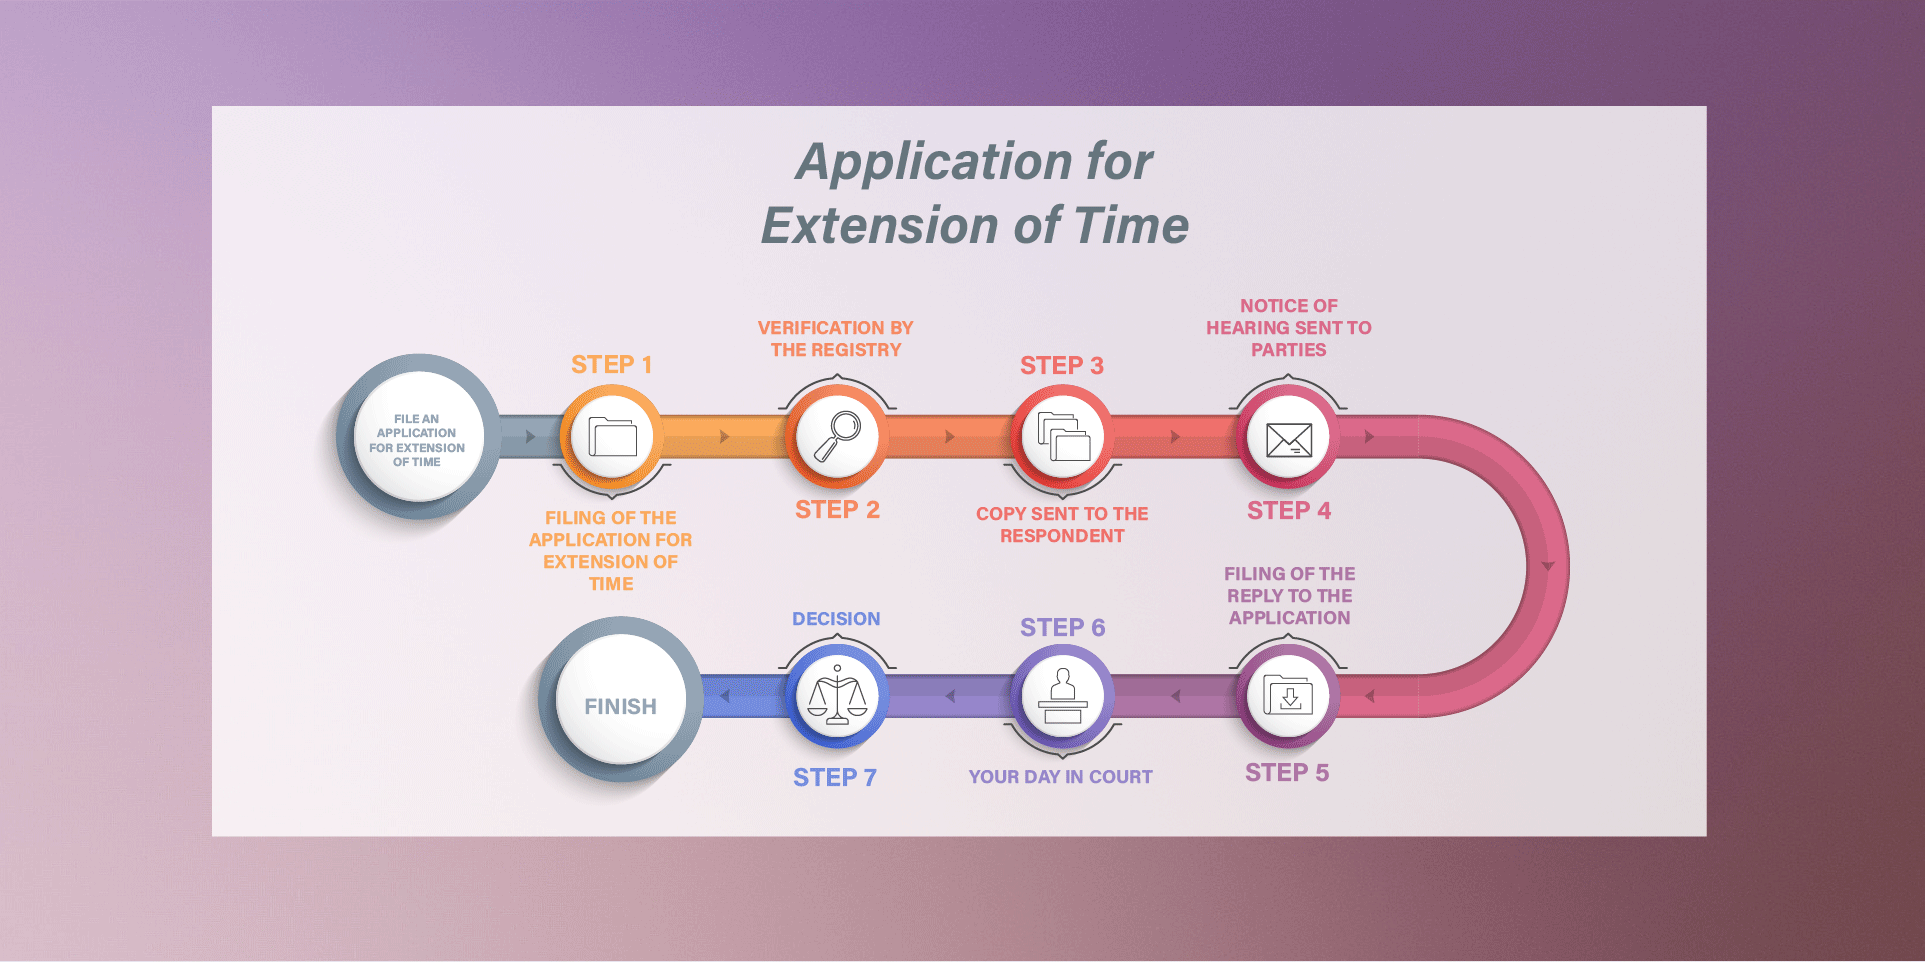 Application for Extension of Time Roadmap Overview